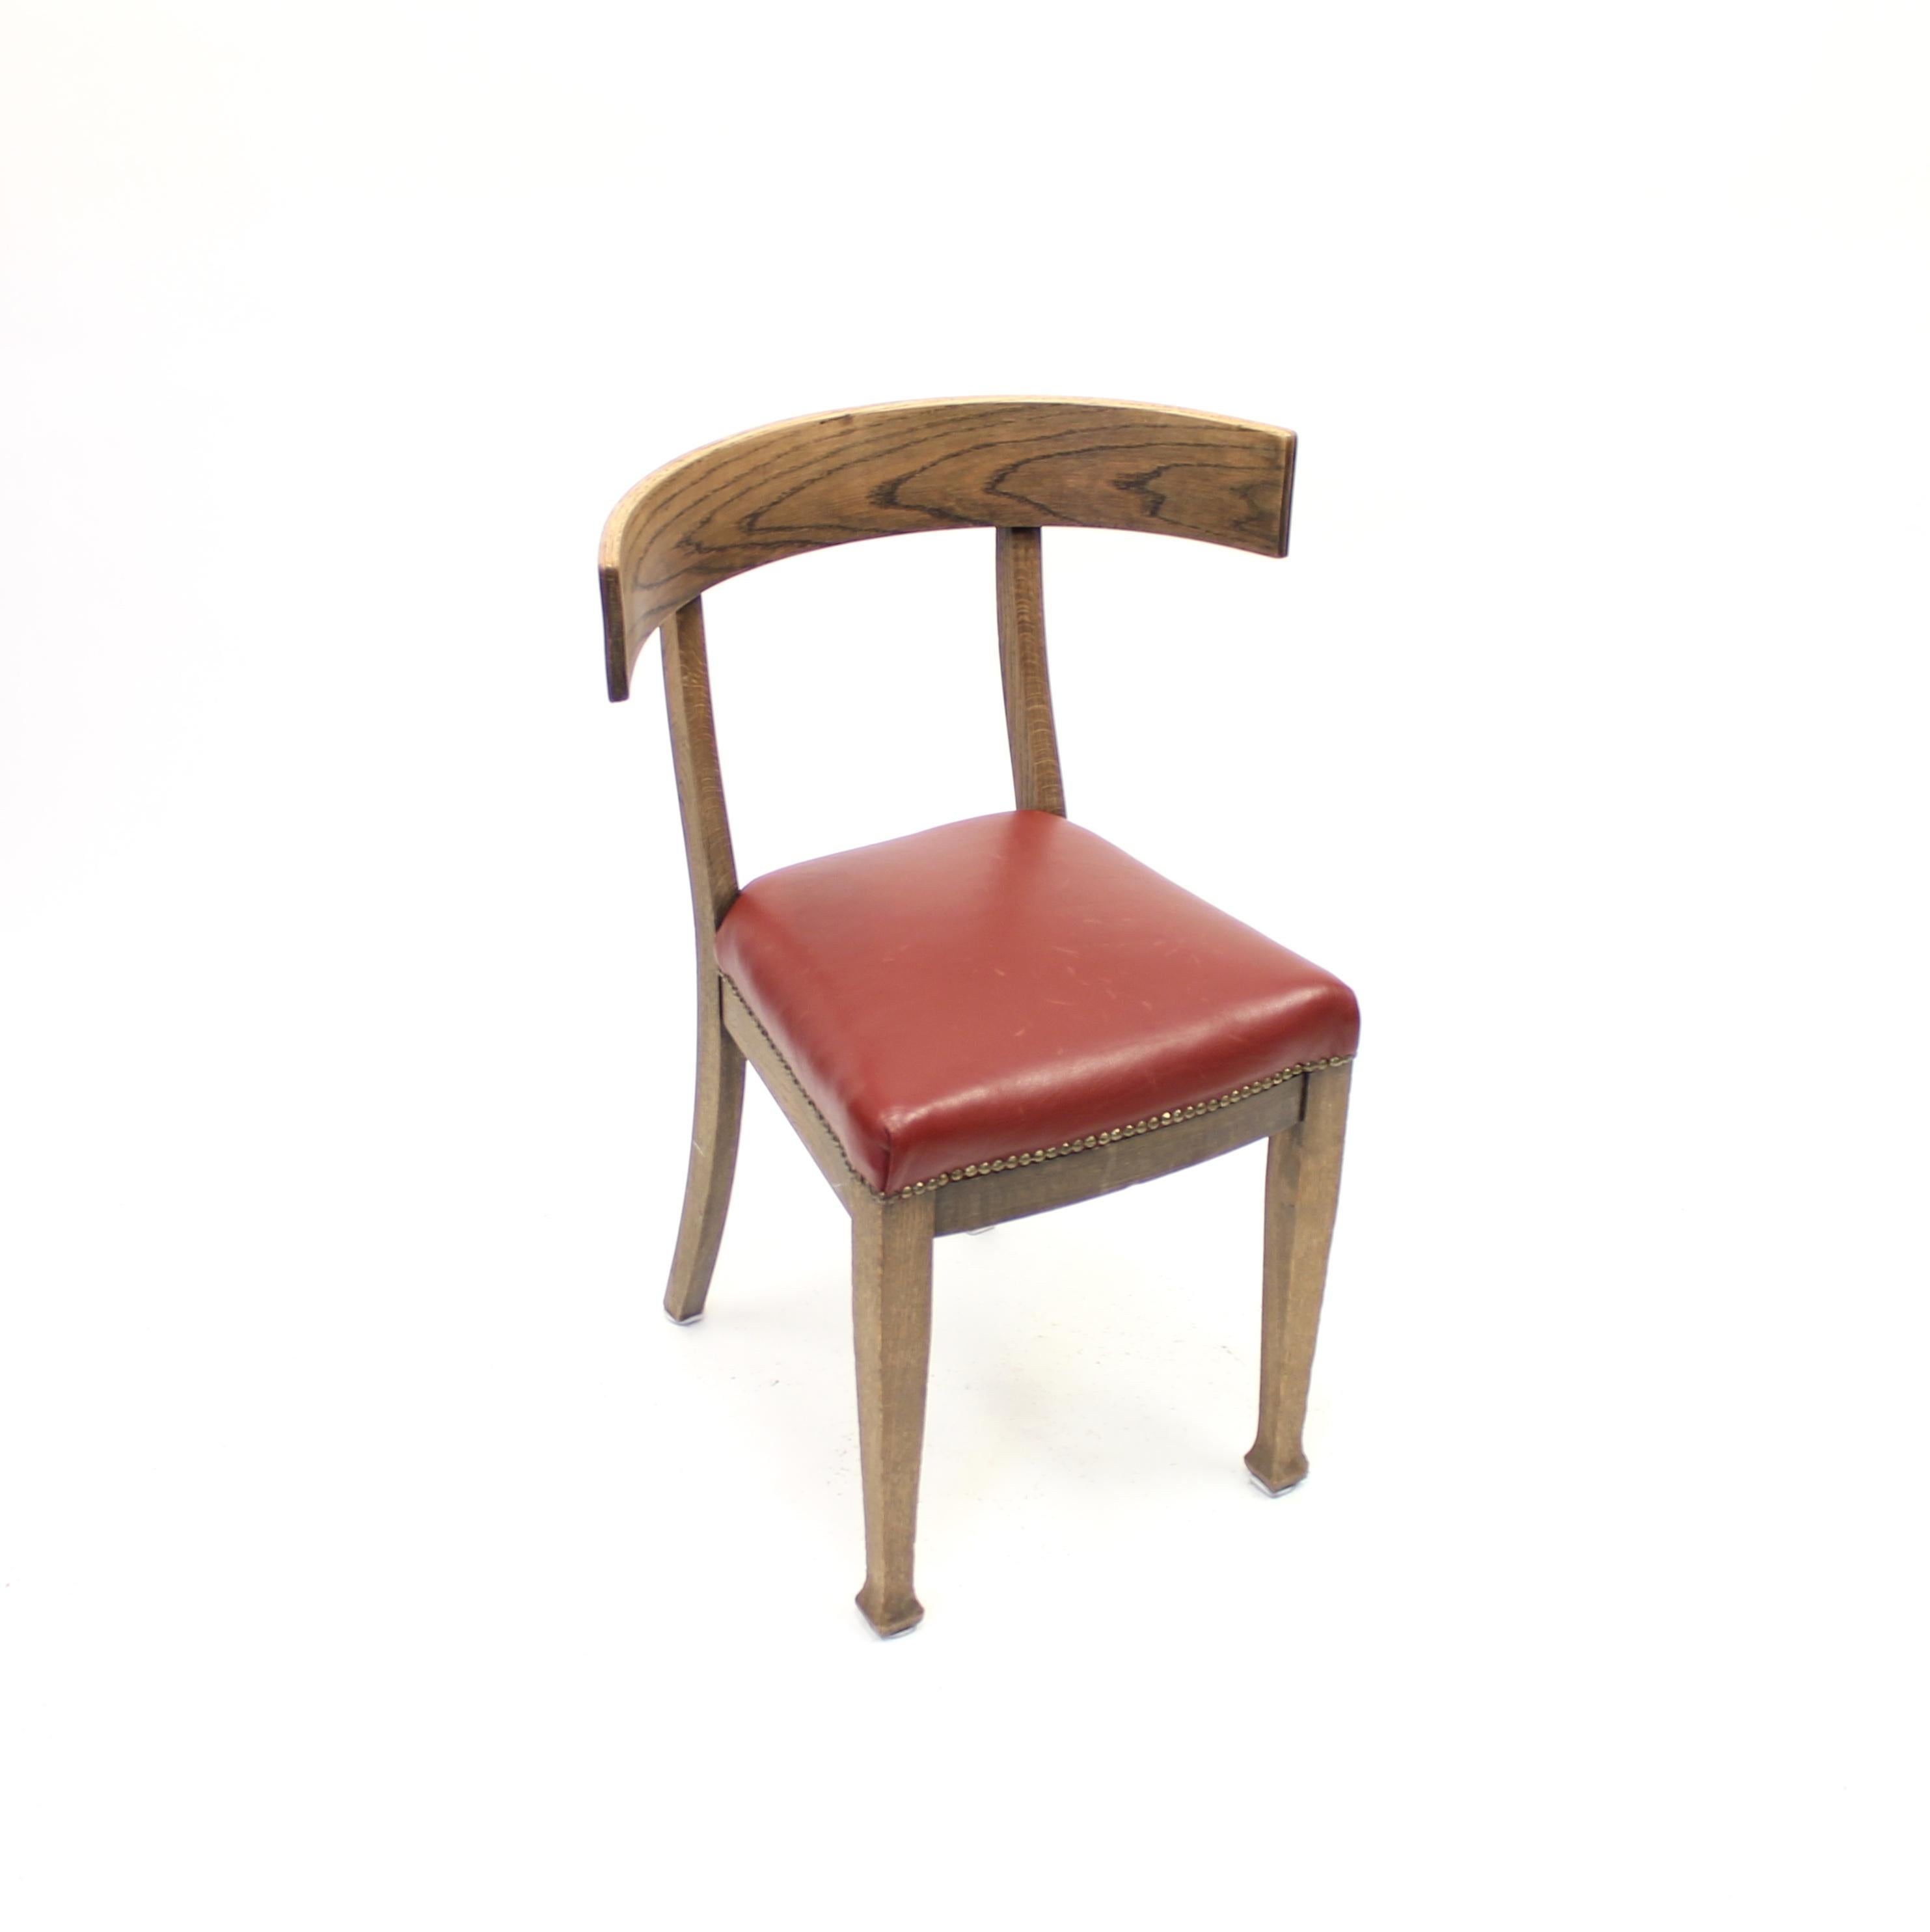 Oak Klismos chair with red leather seat made in the early part of the 20th century. The red leather is of a later date. most likely Scandinavian and made in Sweden. Some scratches and marks to the leather but otherwise in good vintage condition with